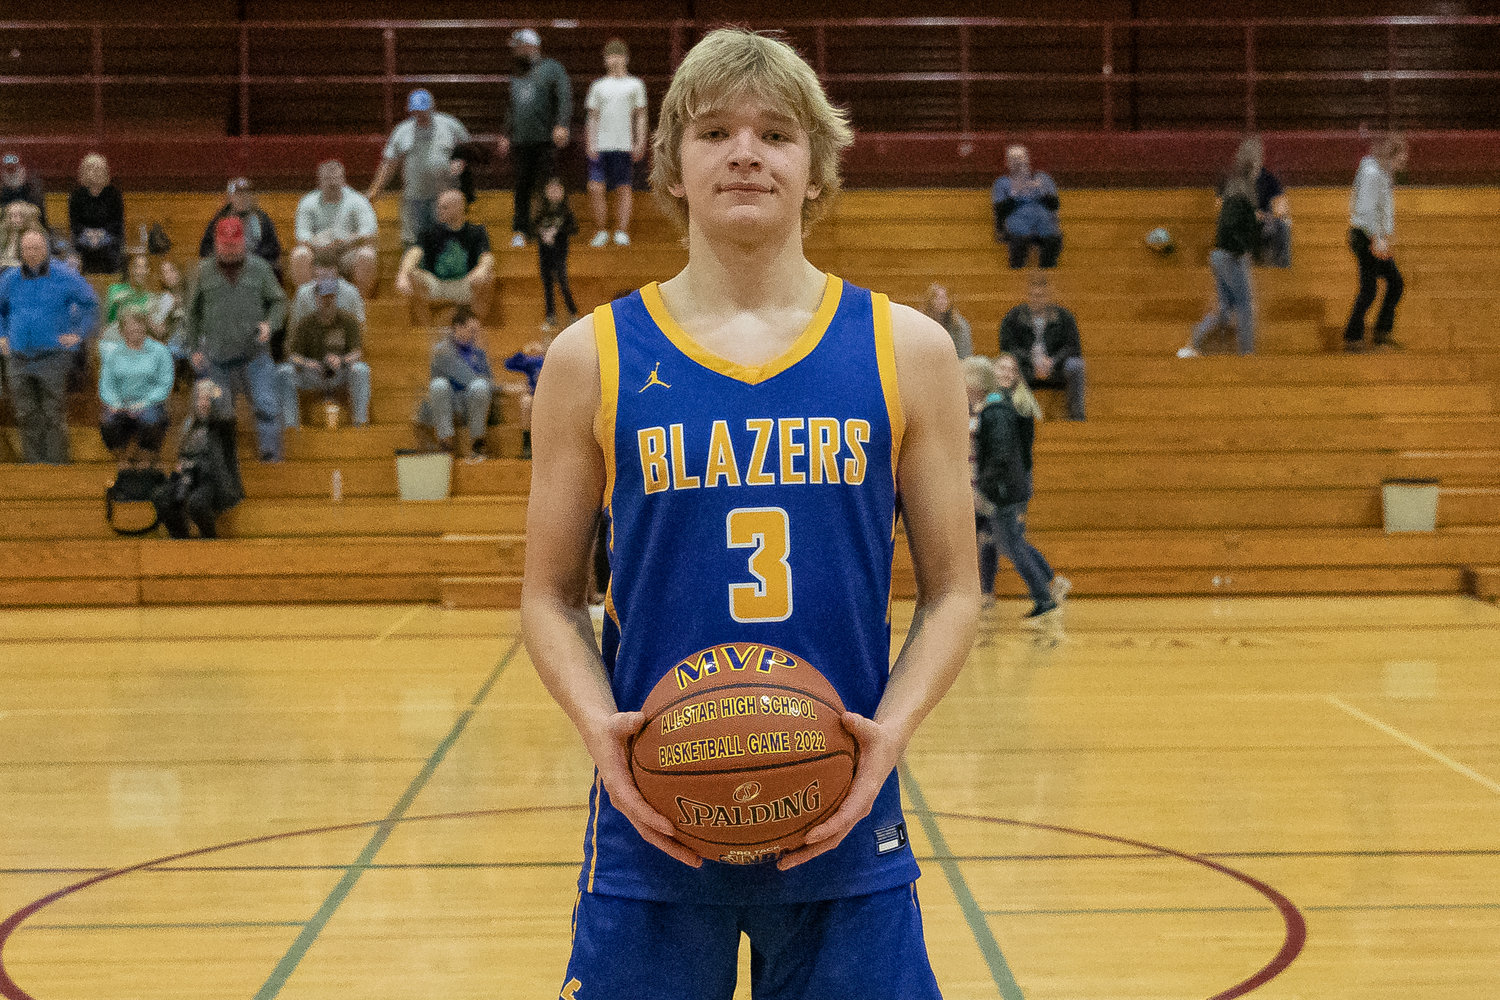 SWW Senior All-Star MVP Dirk Plakinger poses with the game ball after scoring 48 points at W.F. West March 26.